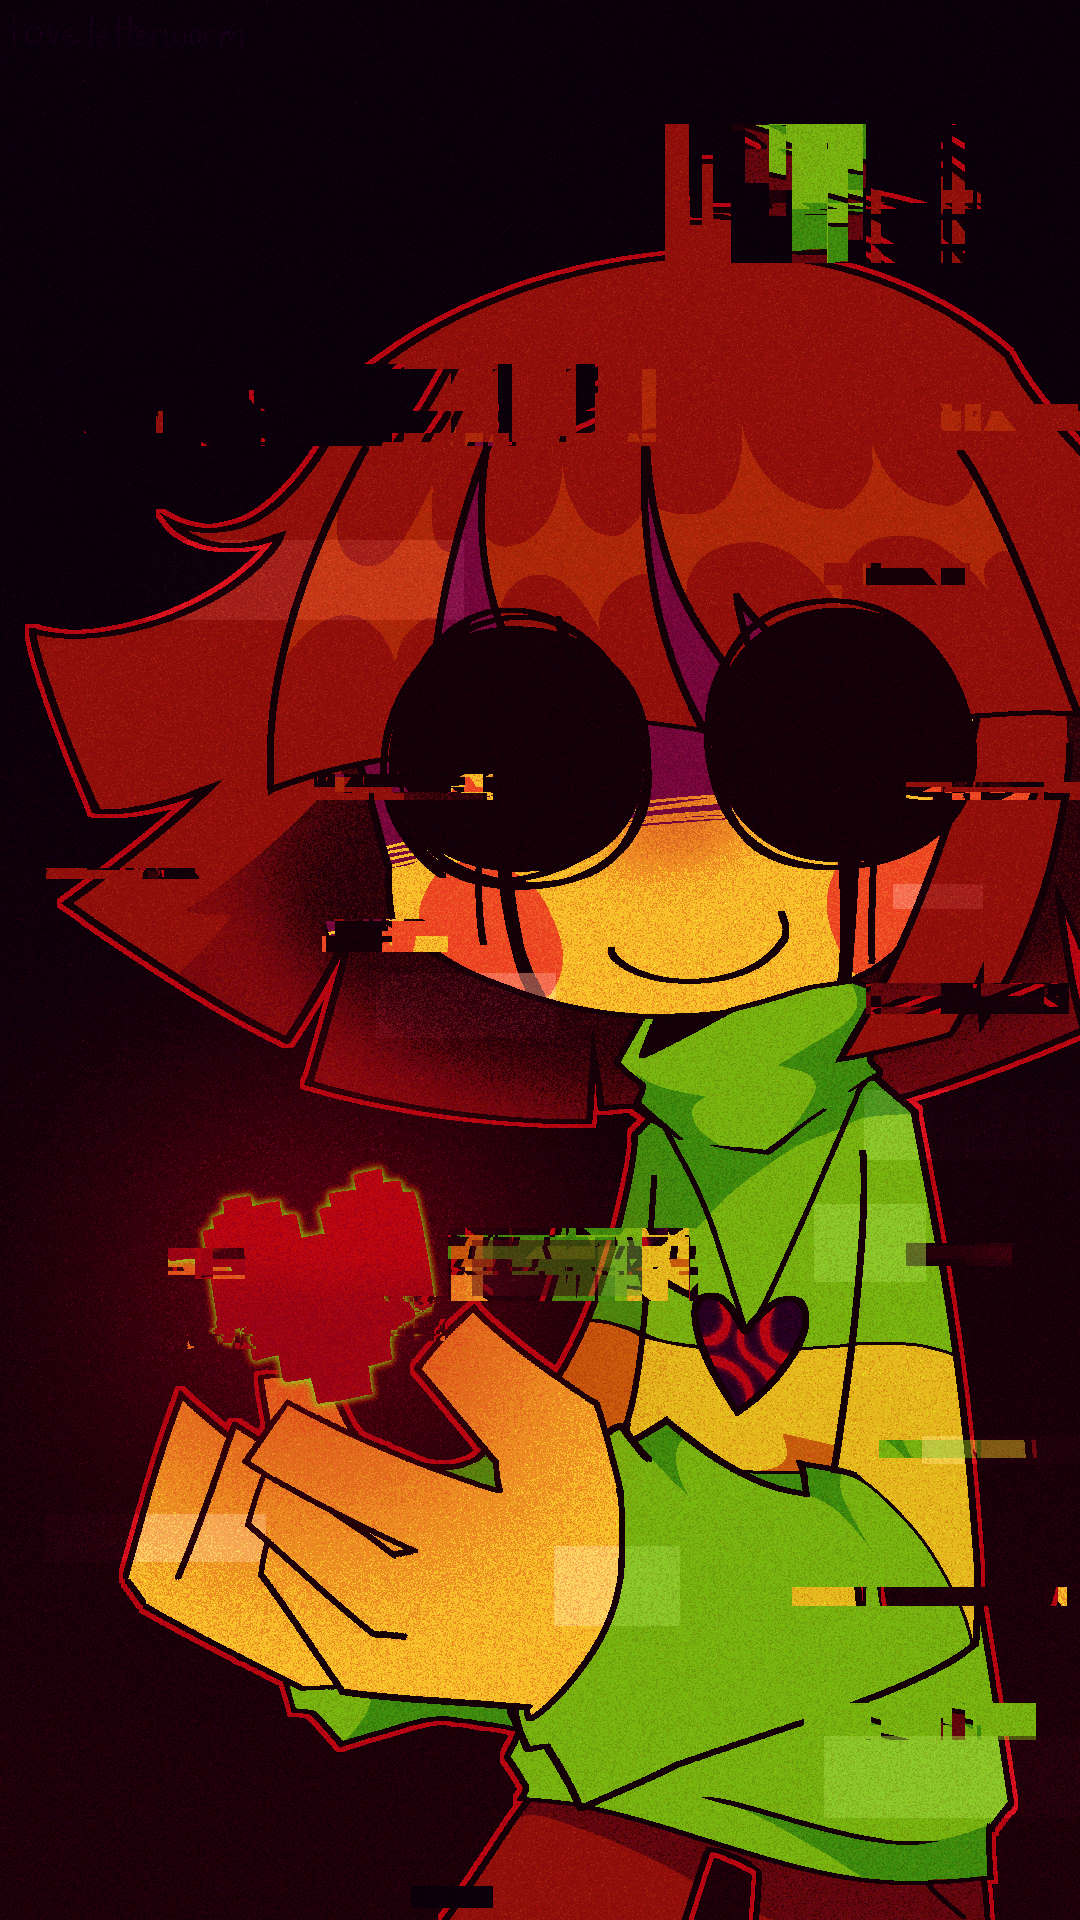 The same drawing of Chara as previous, but edited. The colors are now darker and more saturated, the glitch effects more intense, and their face has changed so that their eyes are scribbly black dripping circles.